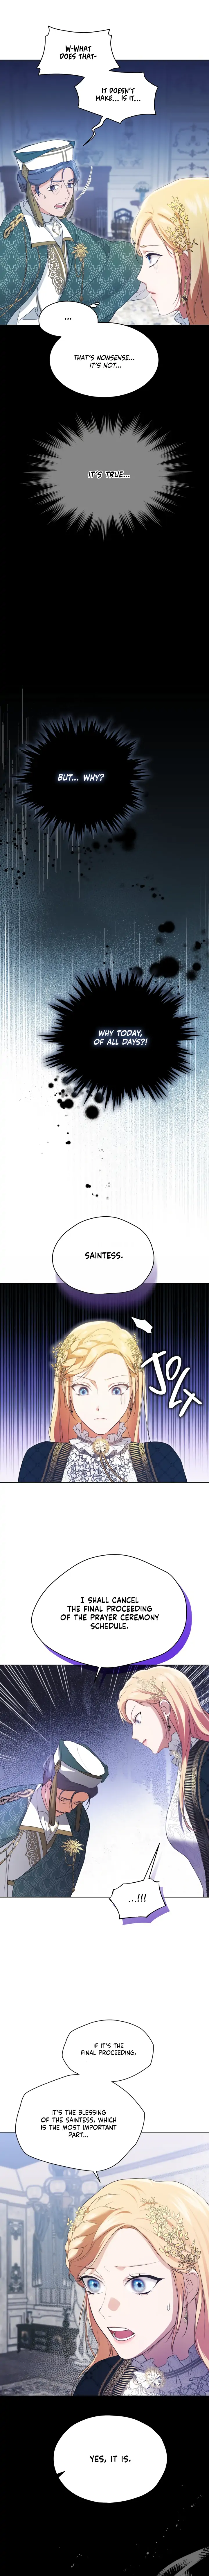 The Fake Saintess Awaits Her Exit chapter 7